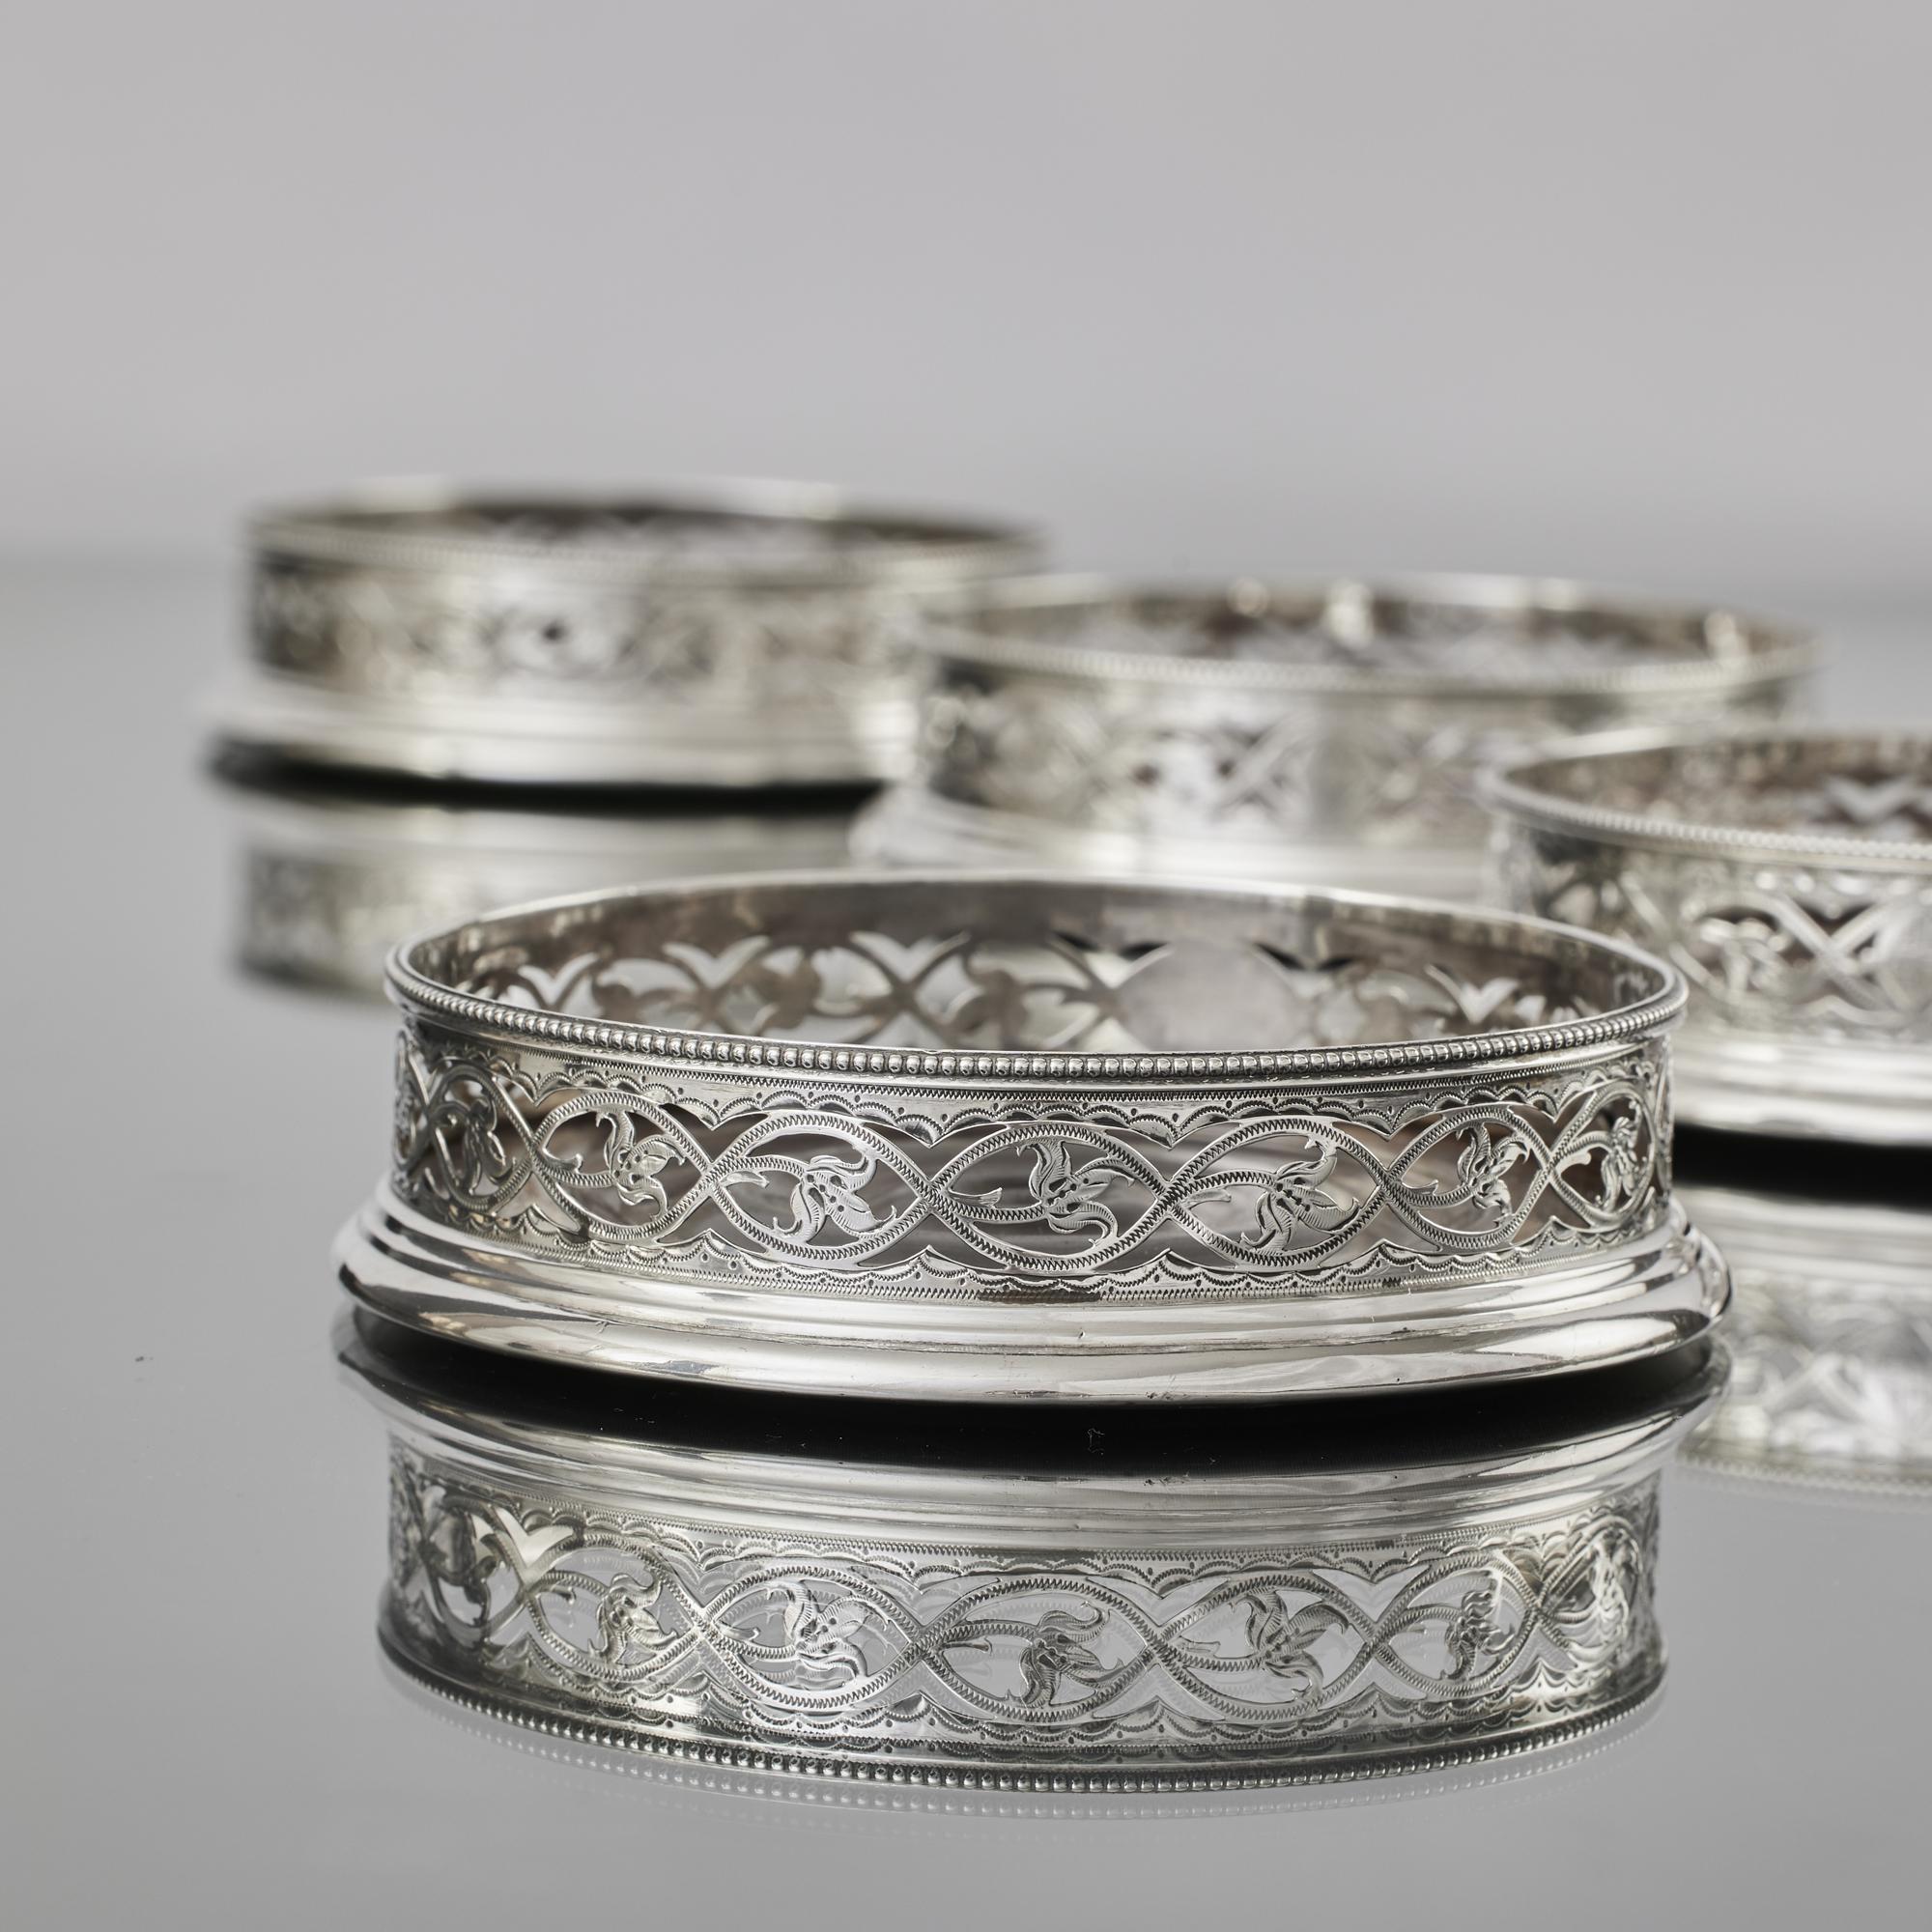 A particularly pretty matched set of four Georgian silver coasters was made by William Plummer in the late 18th century. The body of each wine coaster features beautifully pierced and engraved leaf and scroll decorations. The top edges are decorated